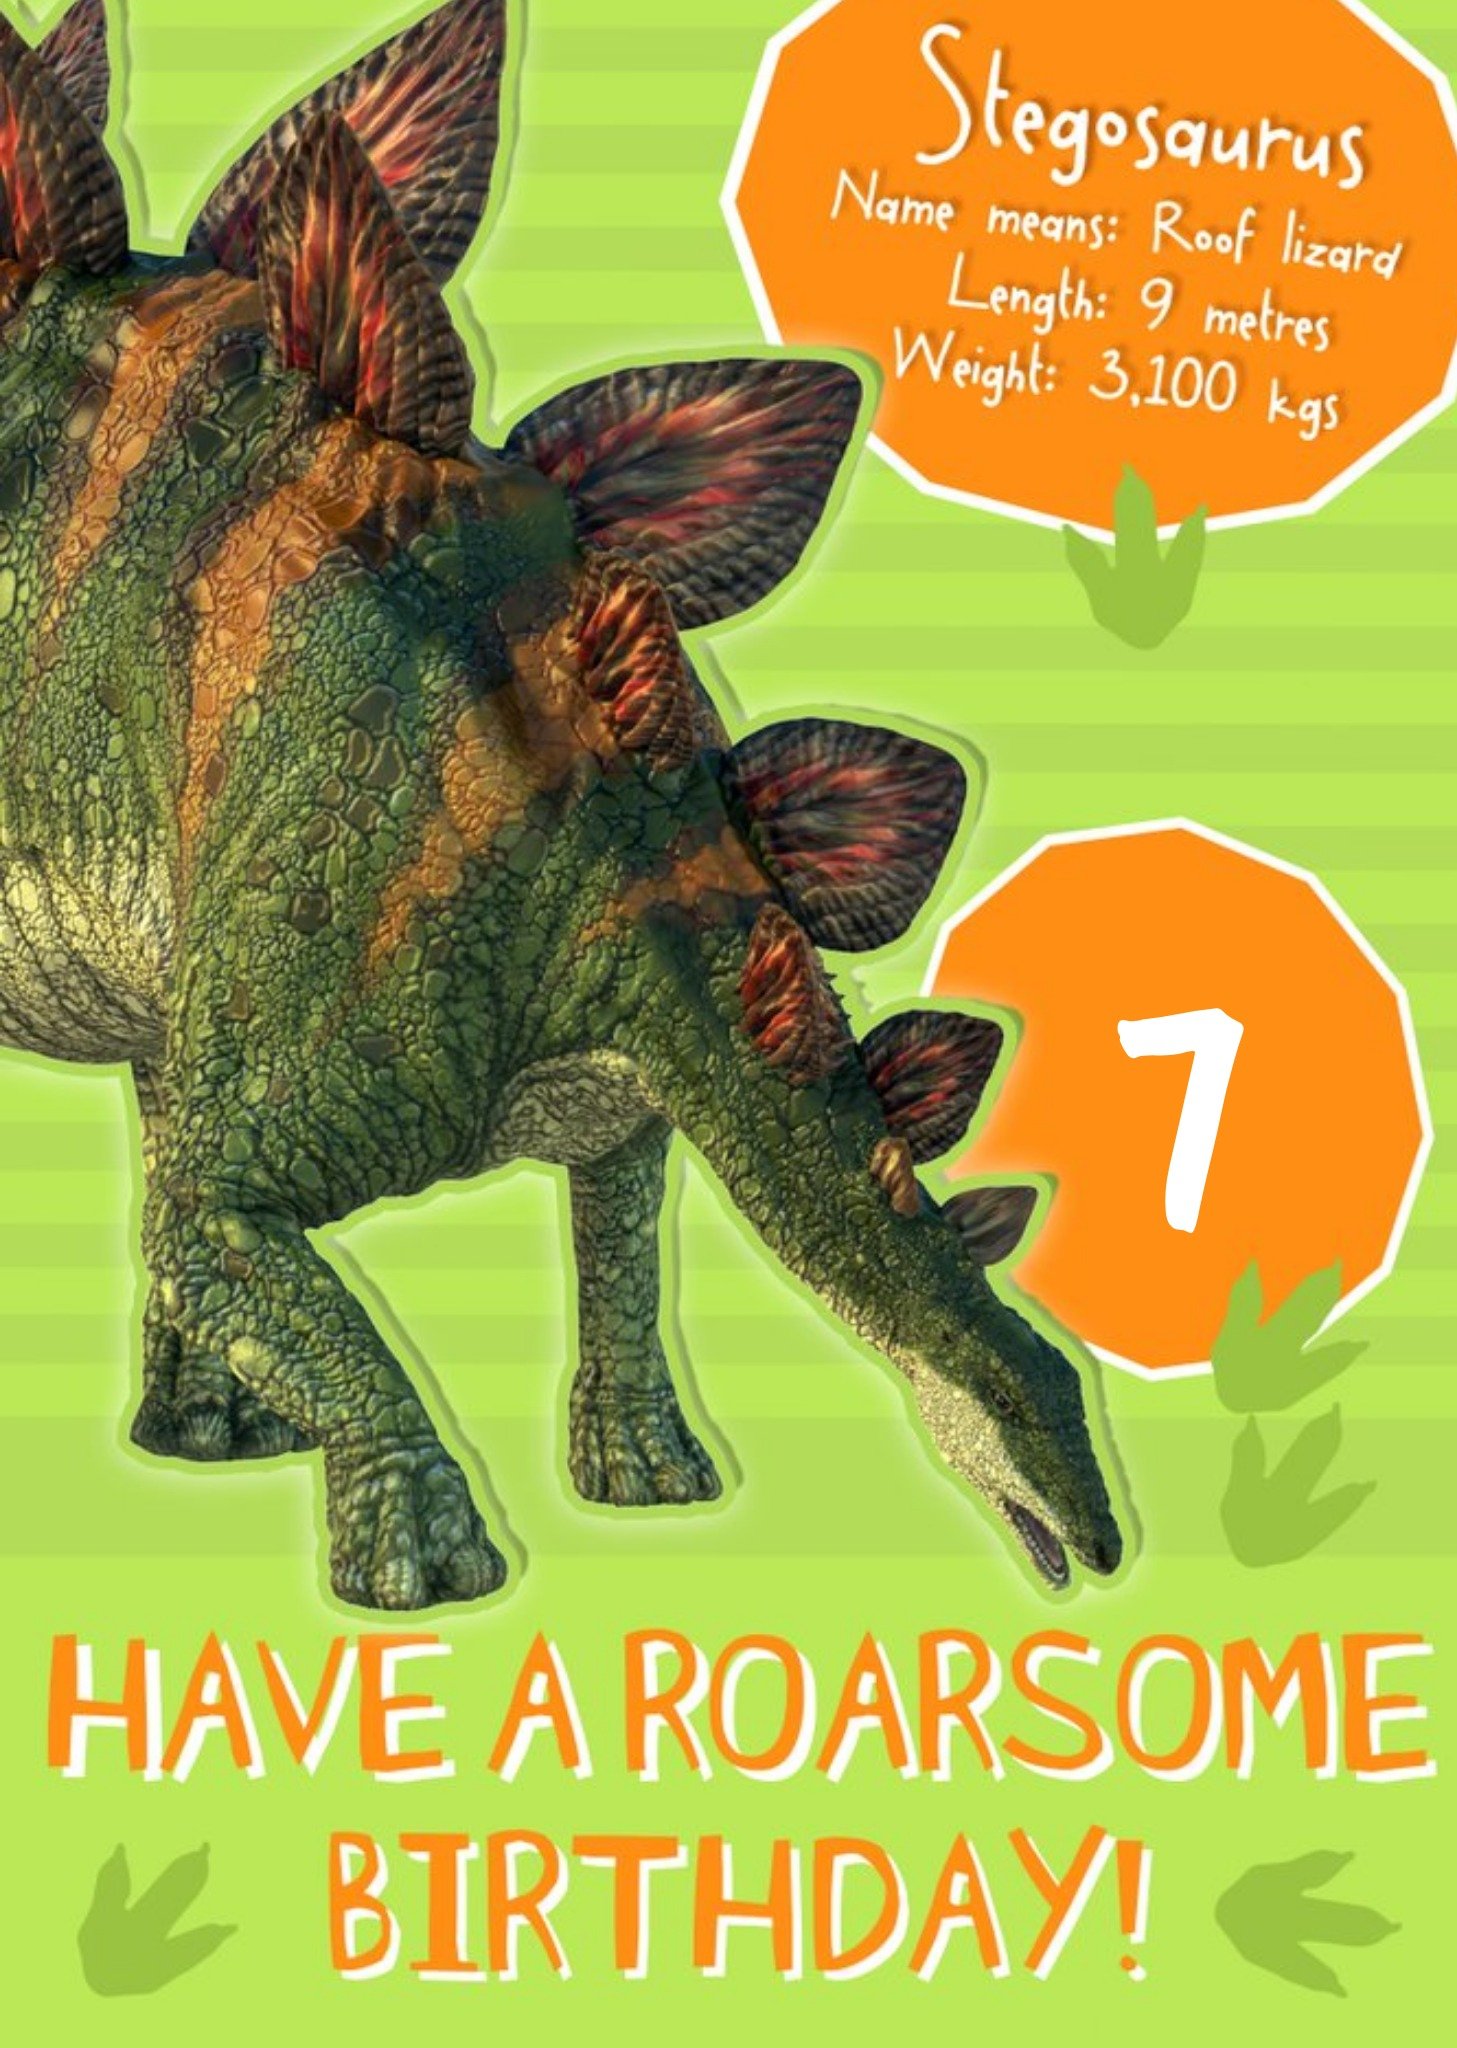 The Natural History Museum Stegosaurus Dinosaur Have A Roarsome Birthday Card, Large